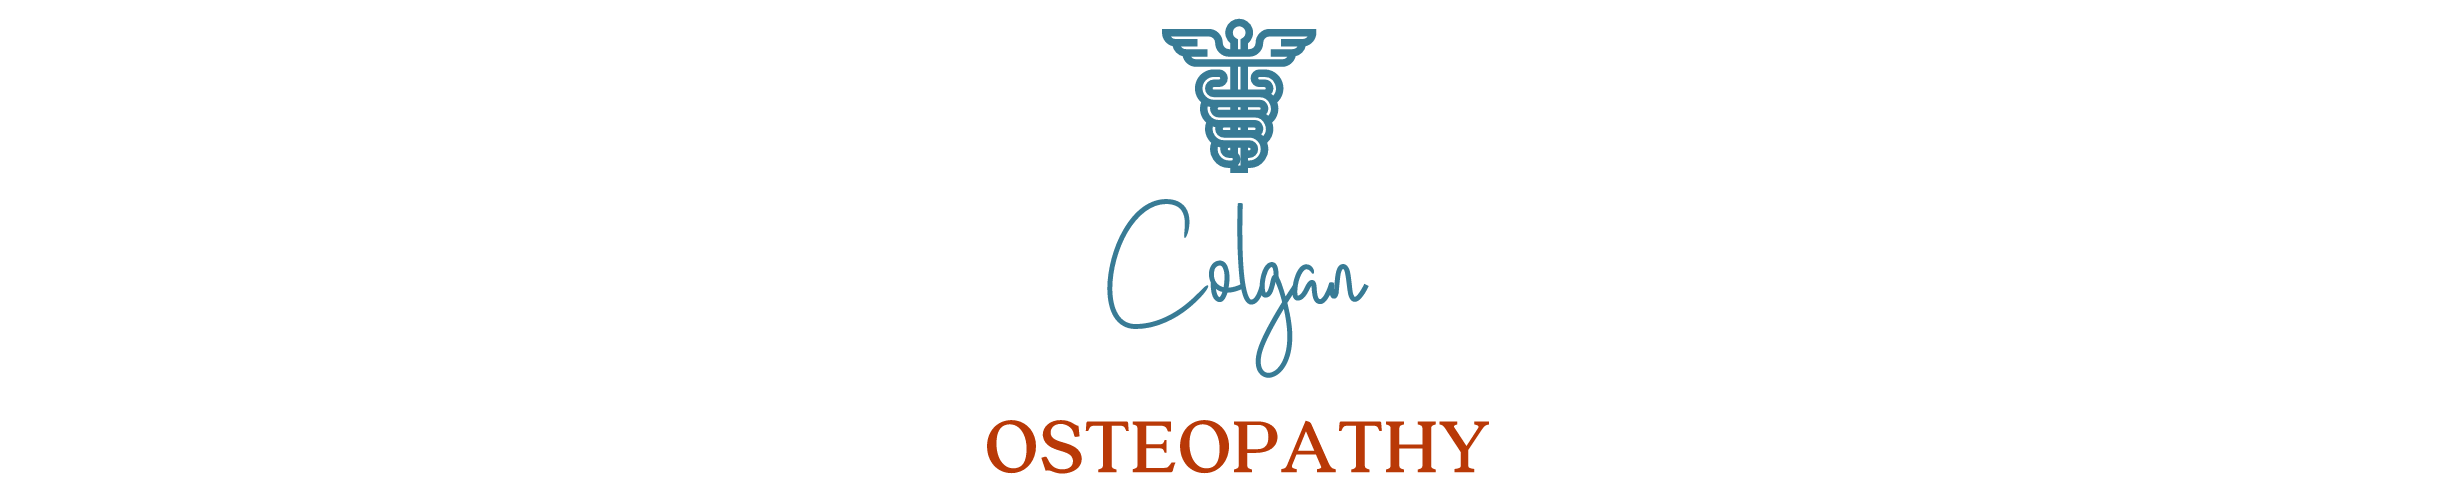 Osteopathy Massage and Acupuncture for Neck Pain | Osteopath in Hatfield